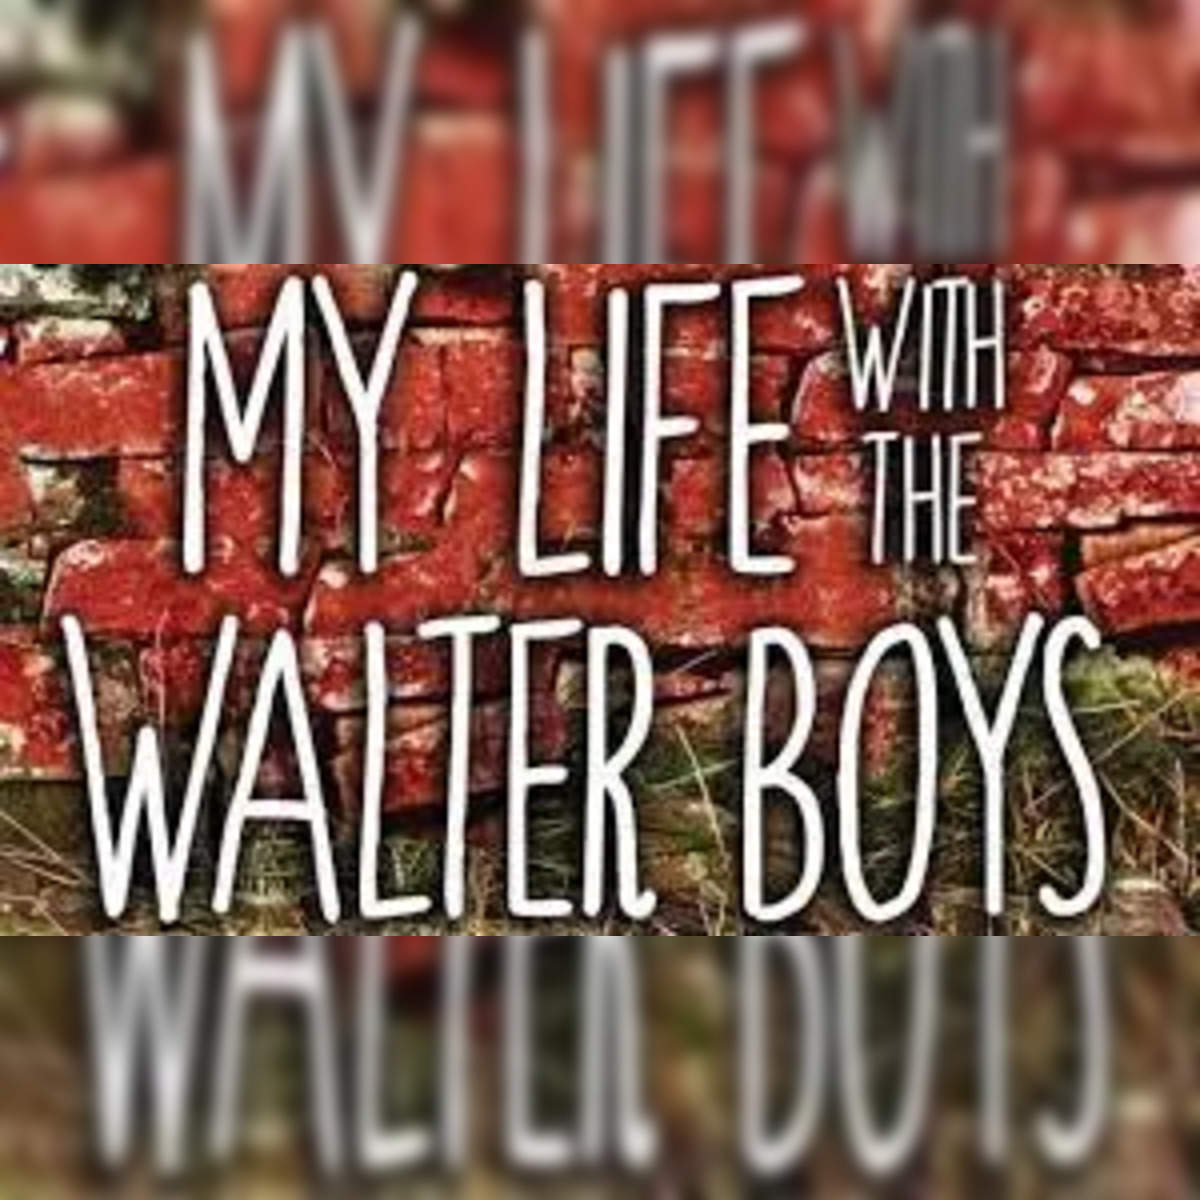 Part 12, #mylifewiththewalterboys is now streaming on #netflix, my life  with the walter boys